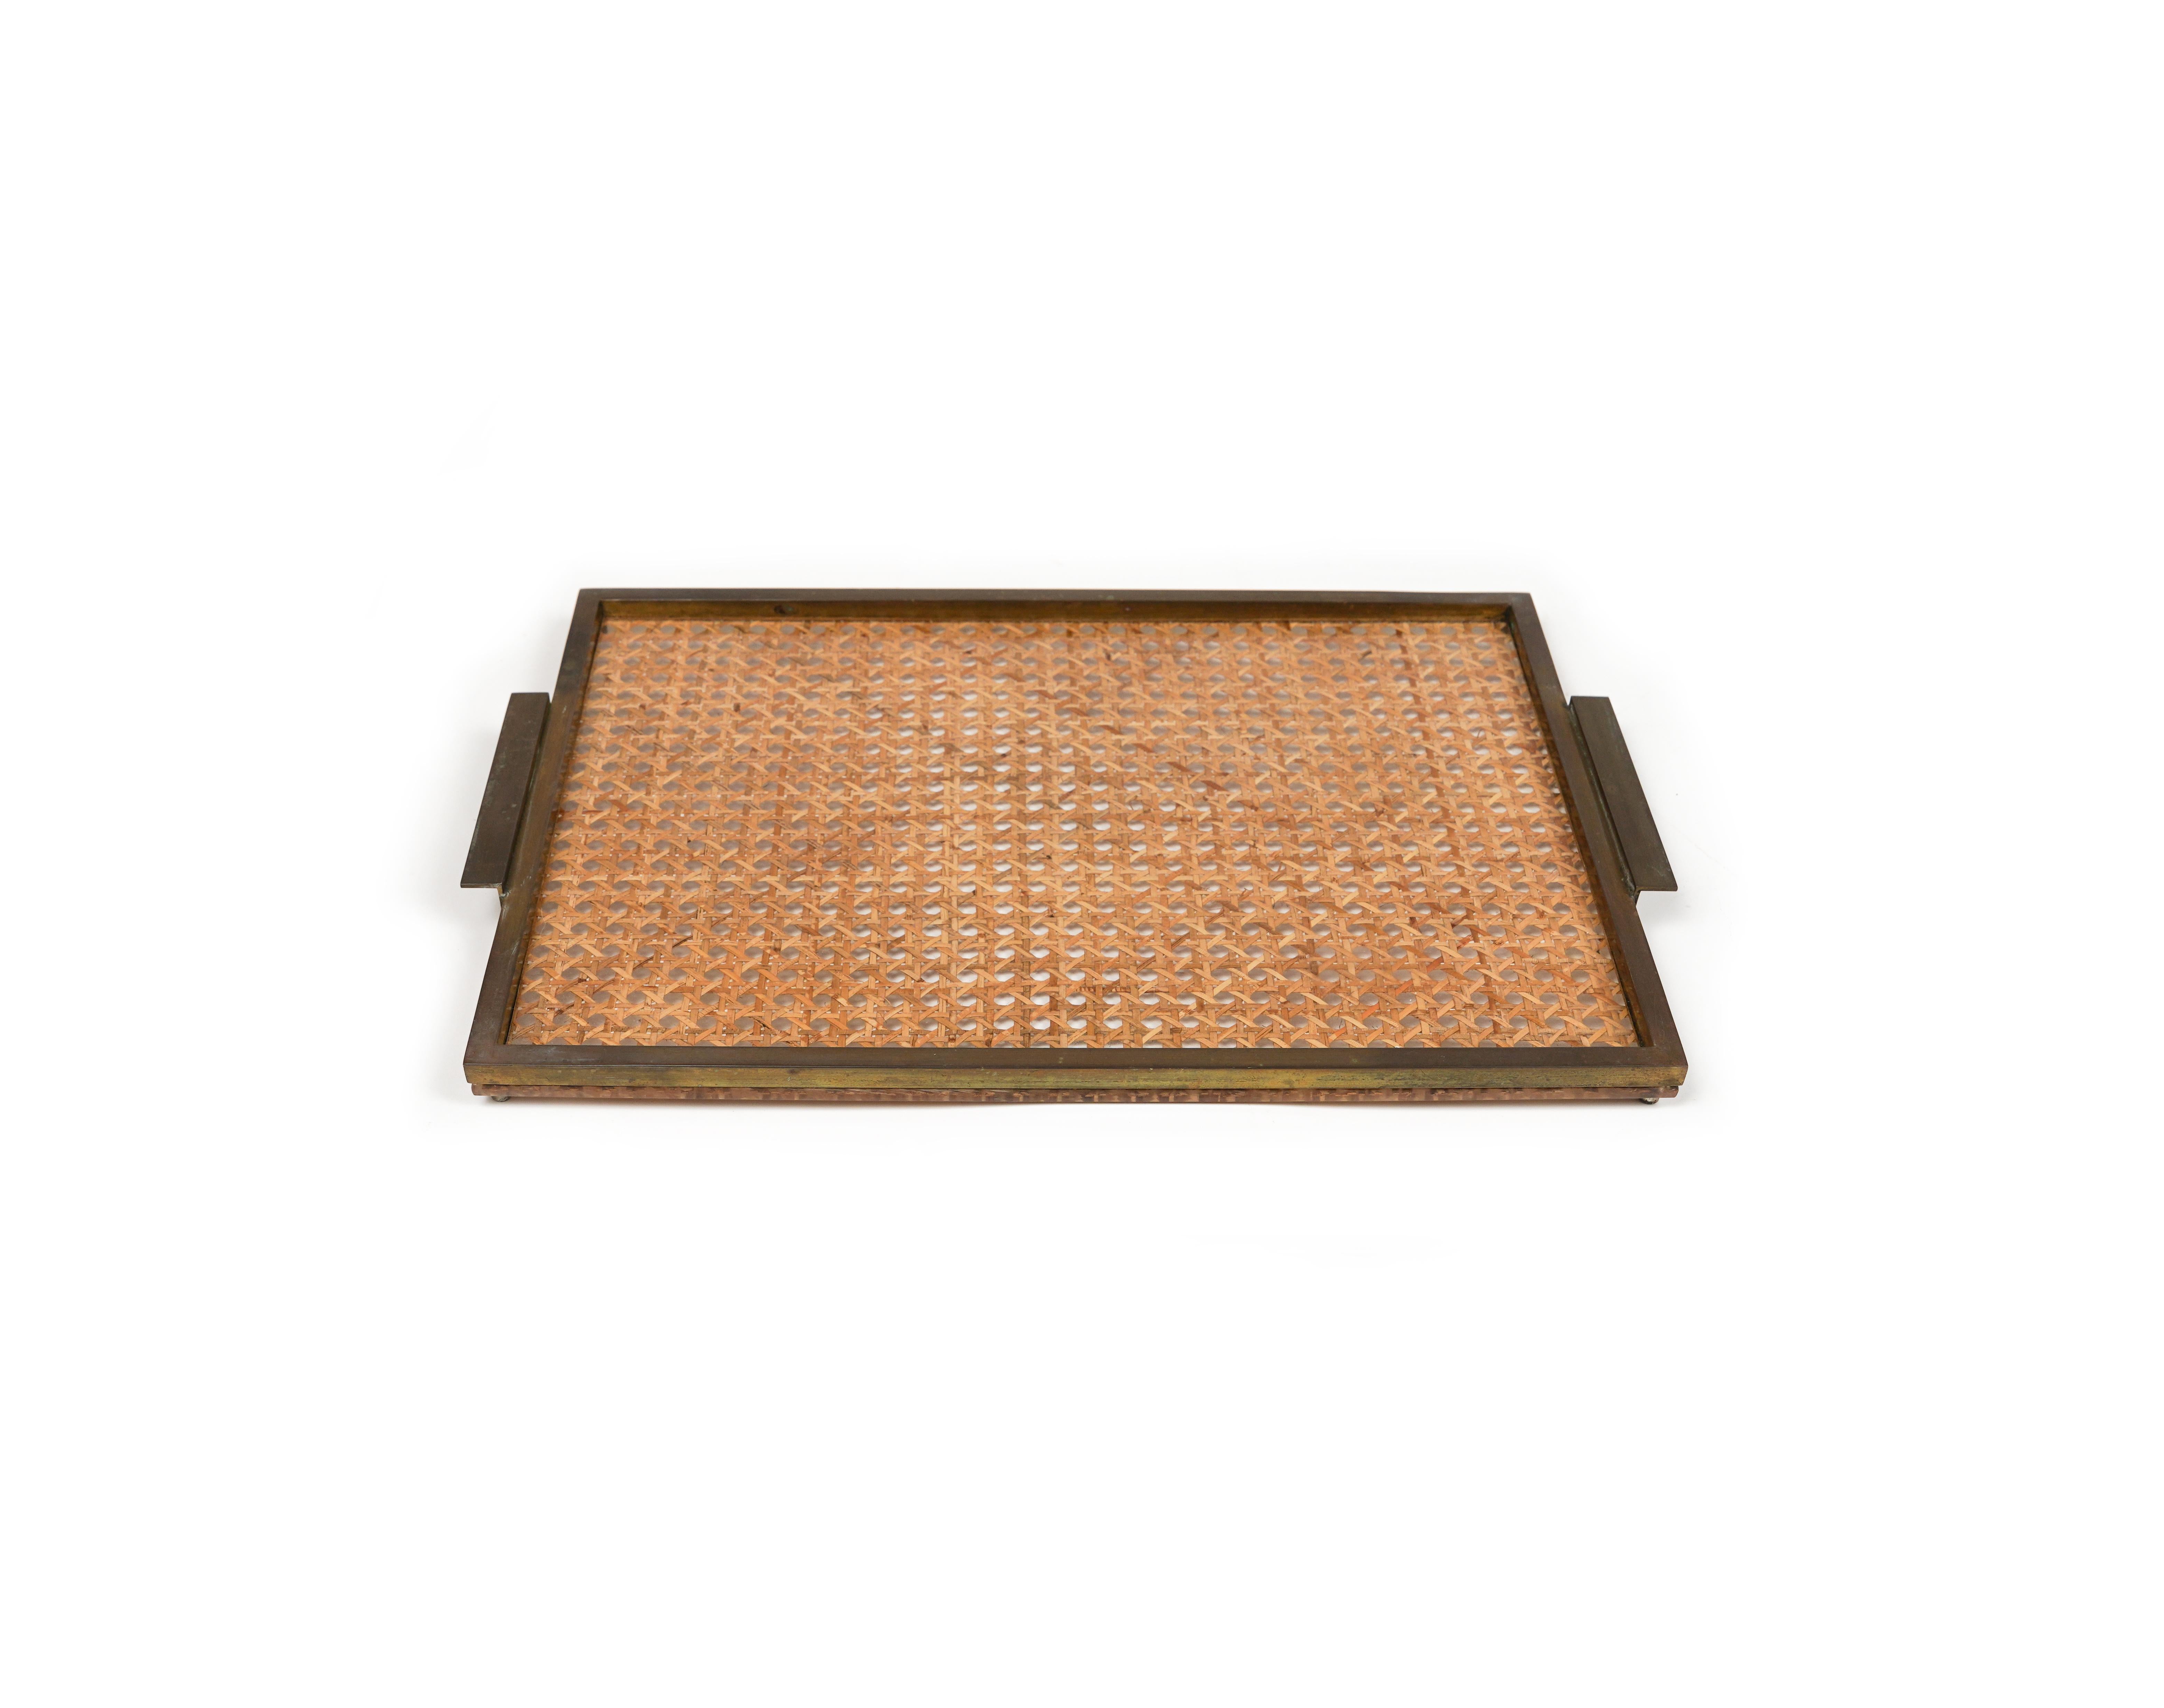 Serving Tray in Lucite, Rattan & Brass Christian Dior Style, Italy, 1970s For Sale 3